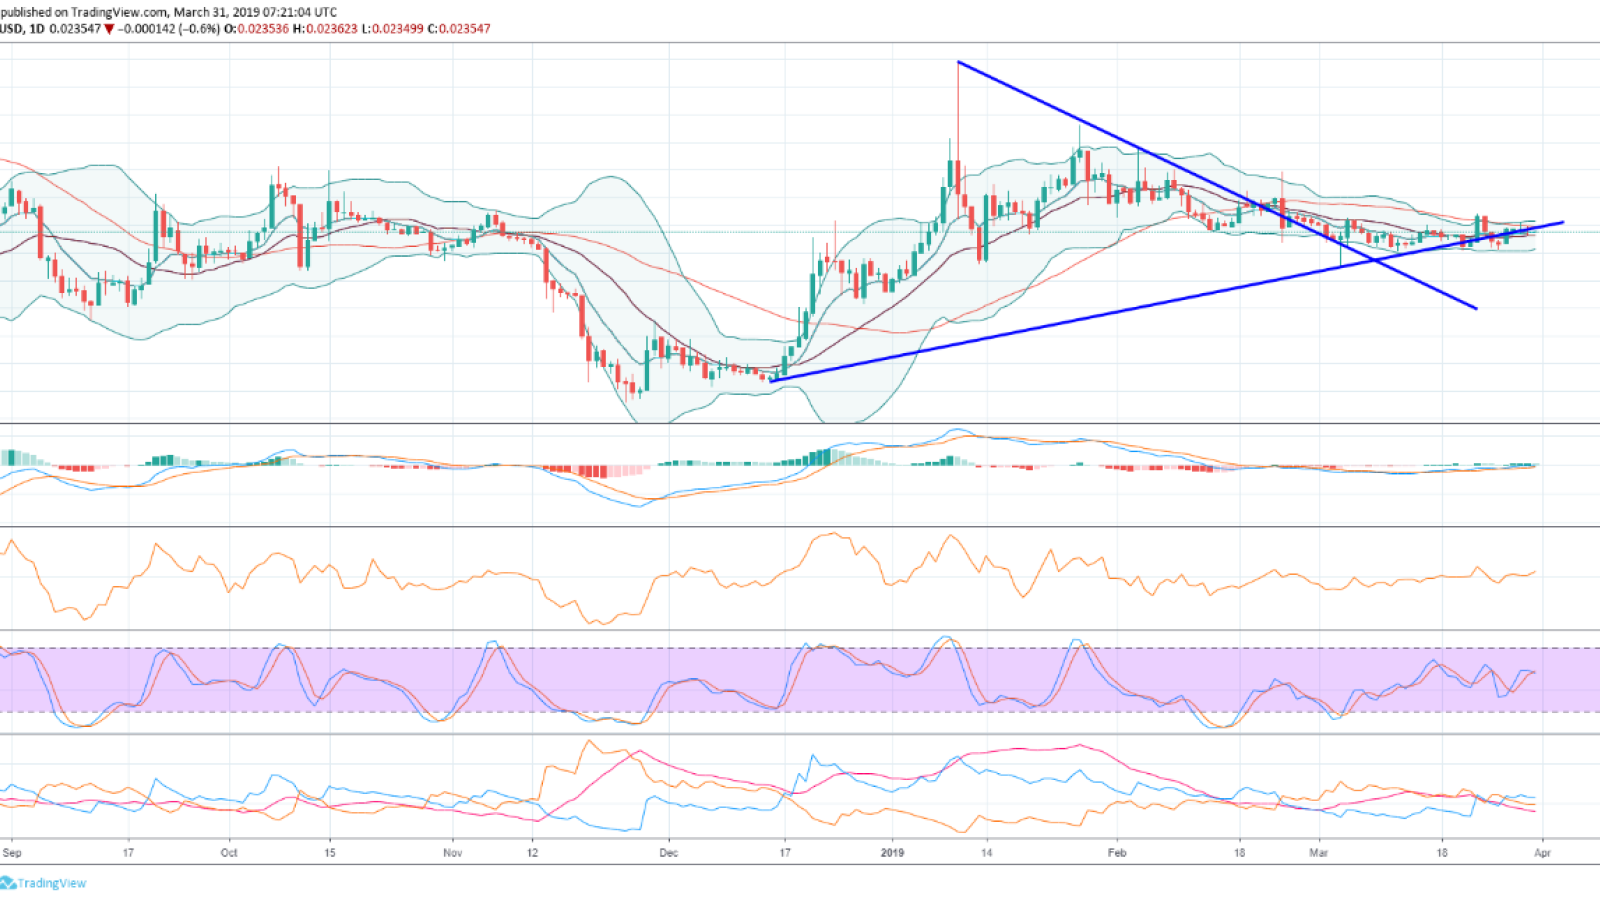 Tron price prediction daily chart